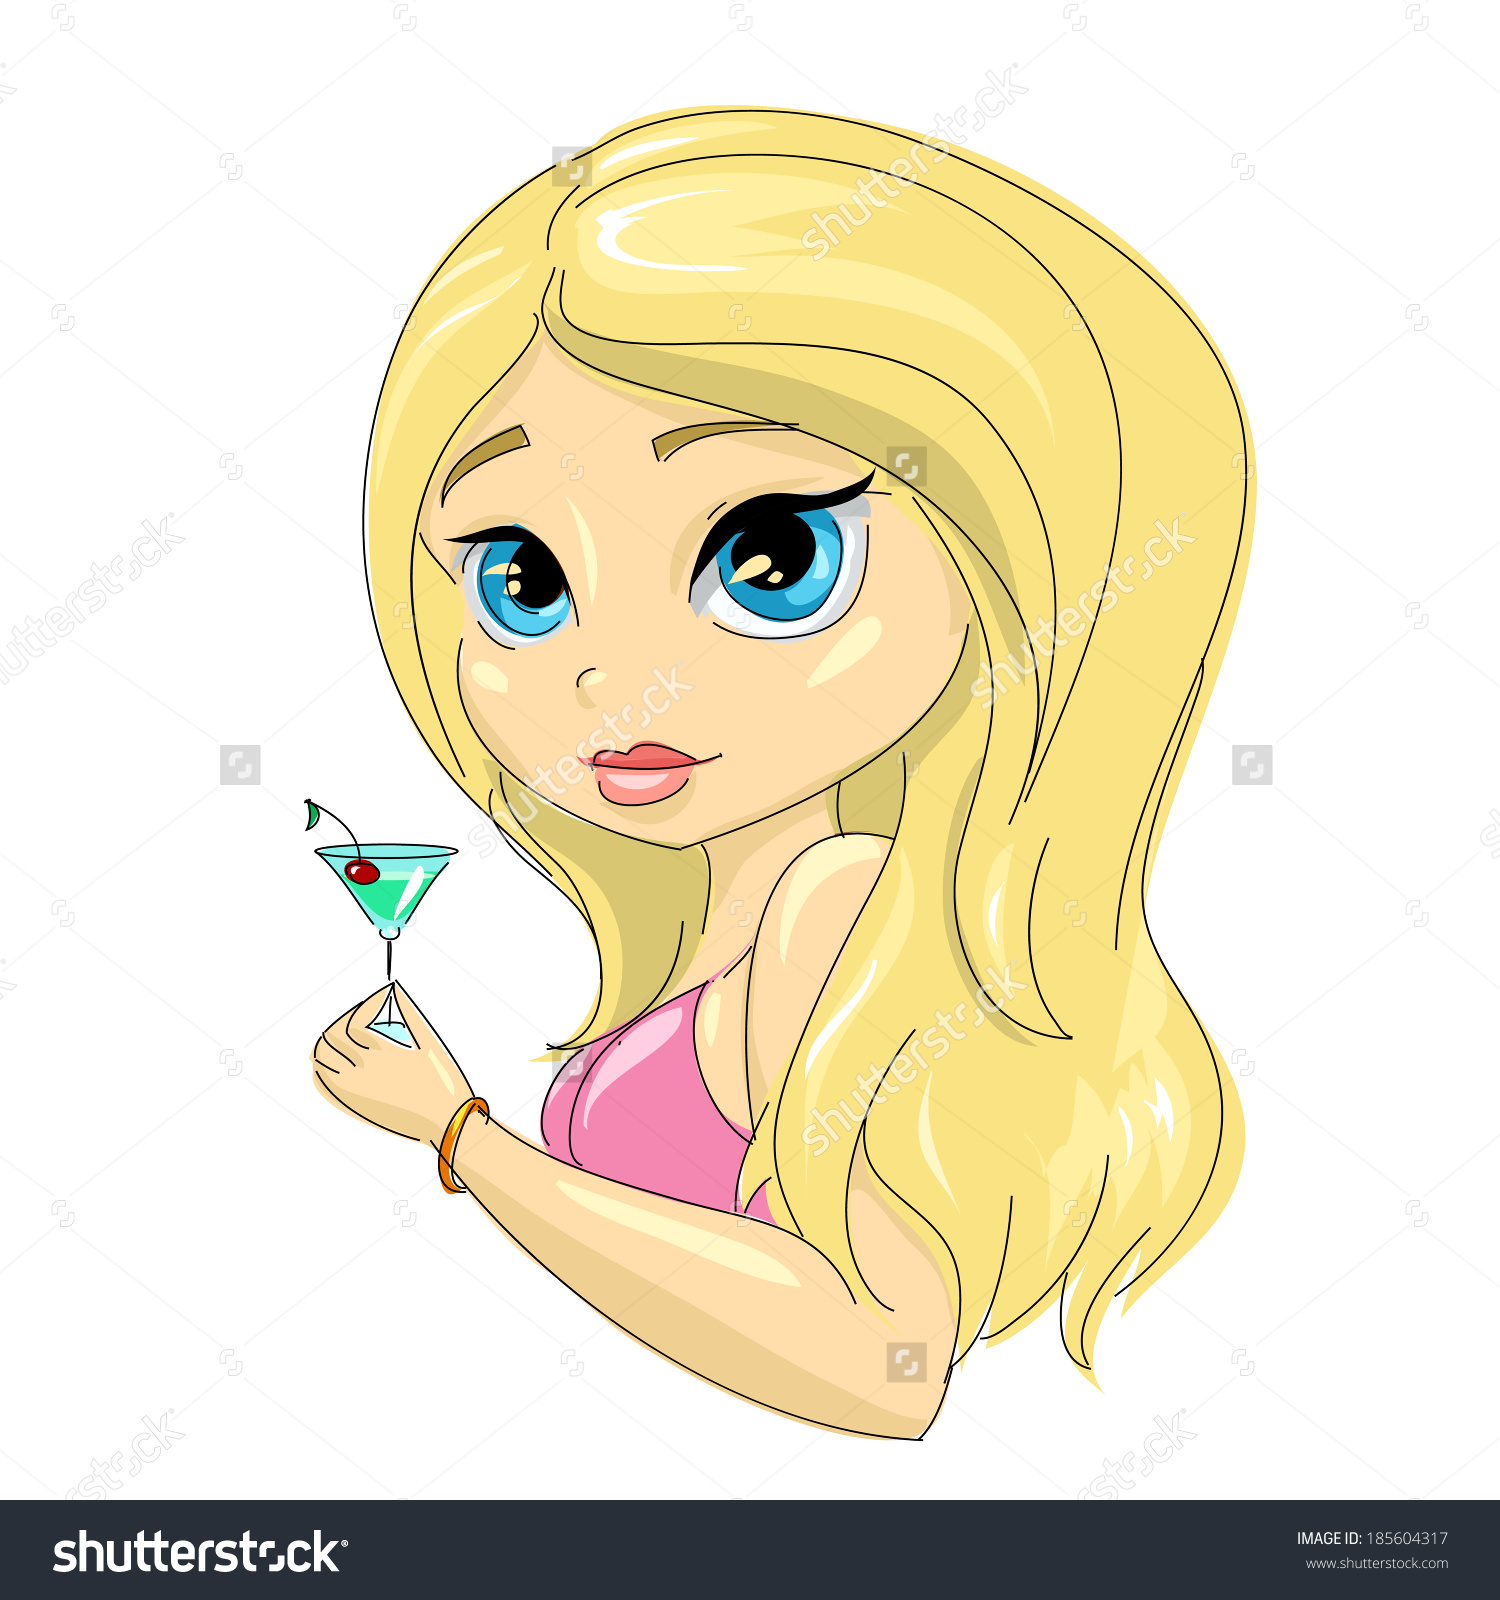 Cartoon girl with blue eyes and blonde hair